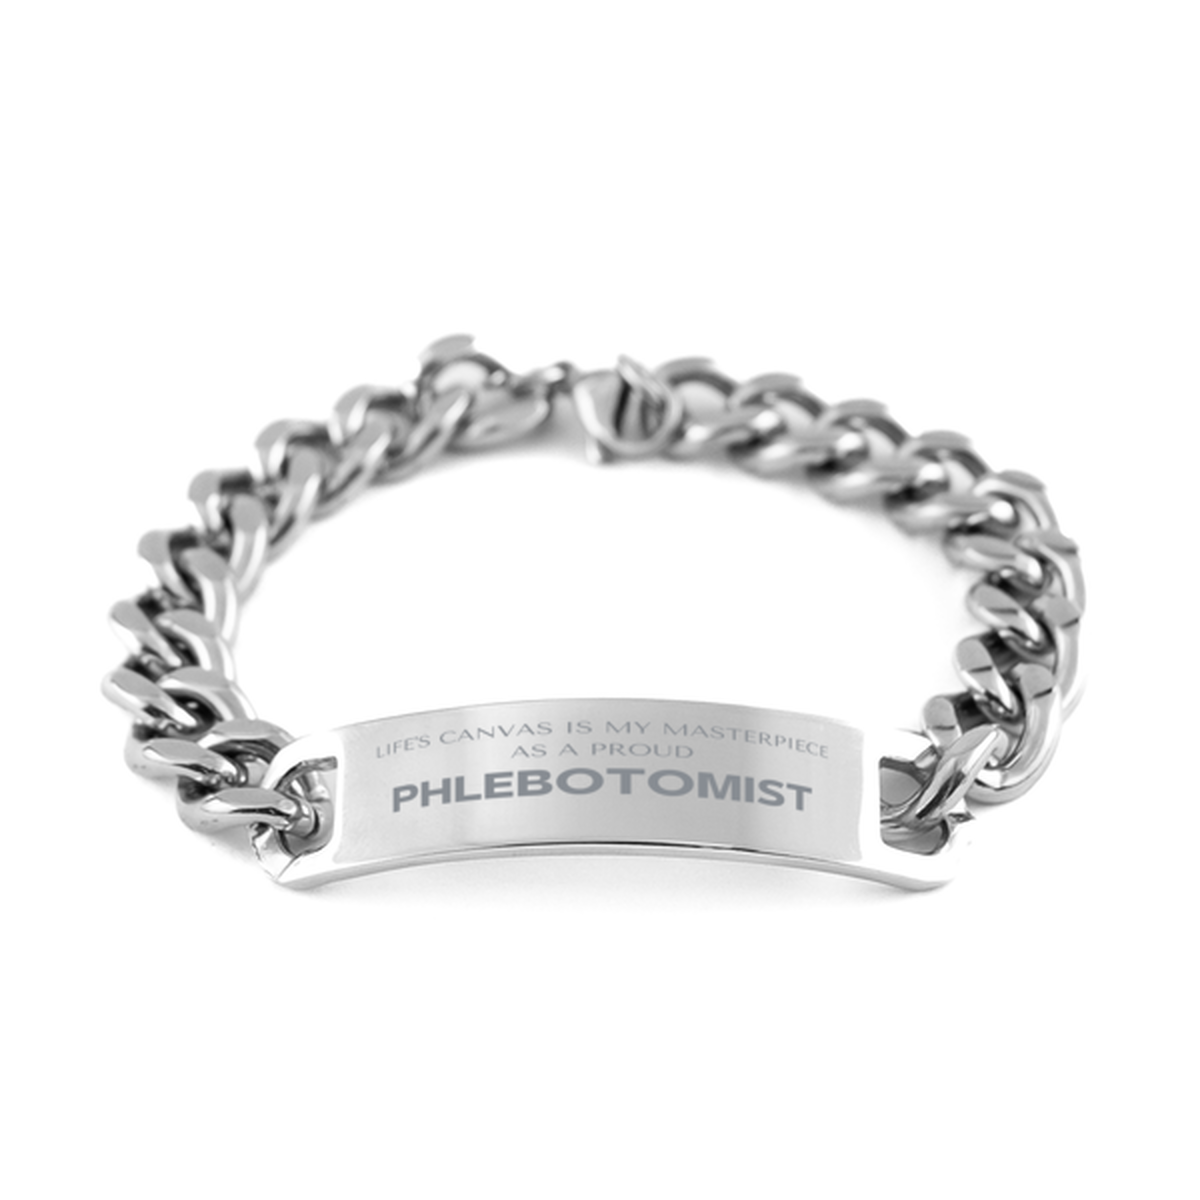 Proud Phlebotomist Gifts, Life's canvas is my masterpiece, Epic Birthday Christmas Unique Cuban Chain Stainless Steel Bracelet For Phlebotomist, Coworkers, Men, Women, Friends